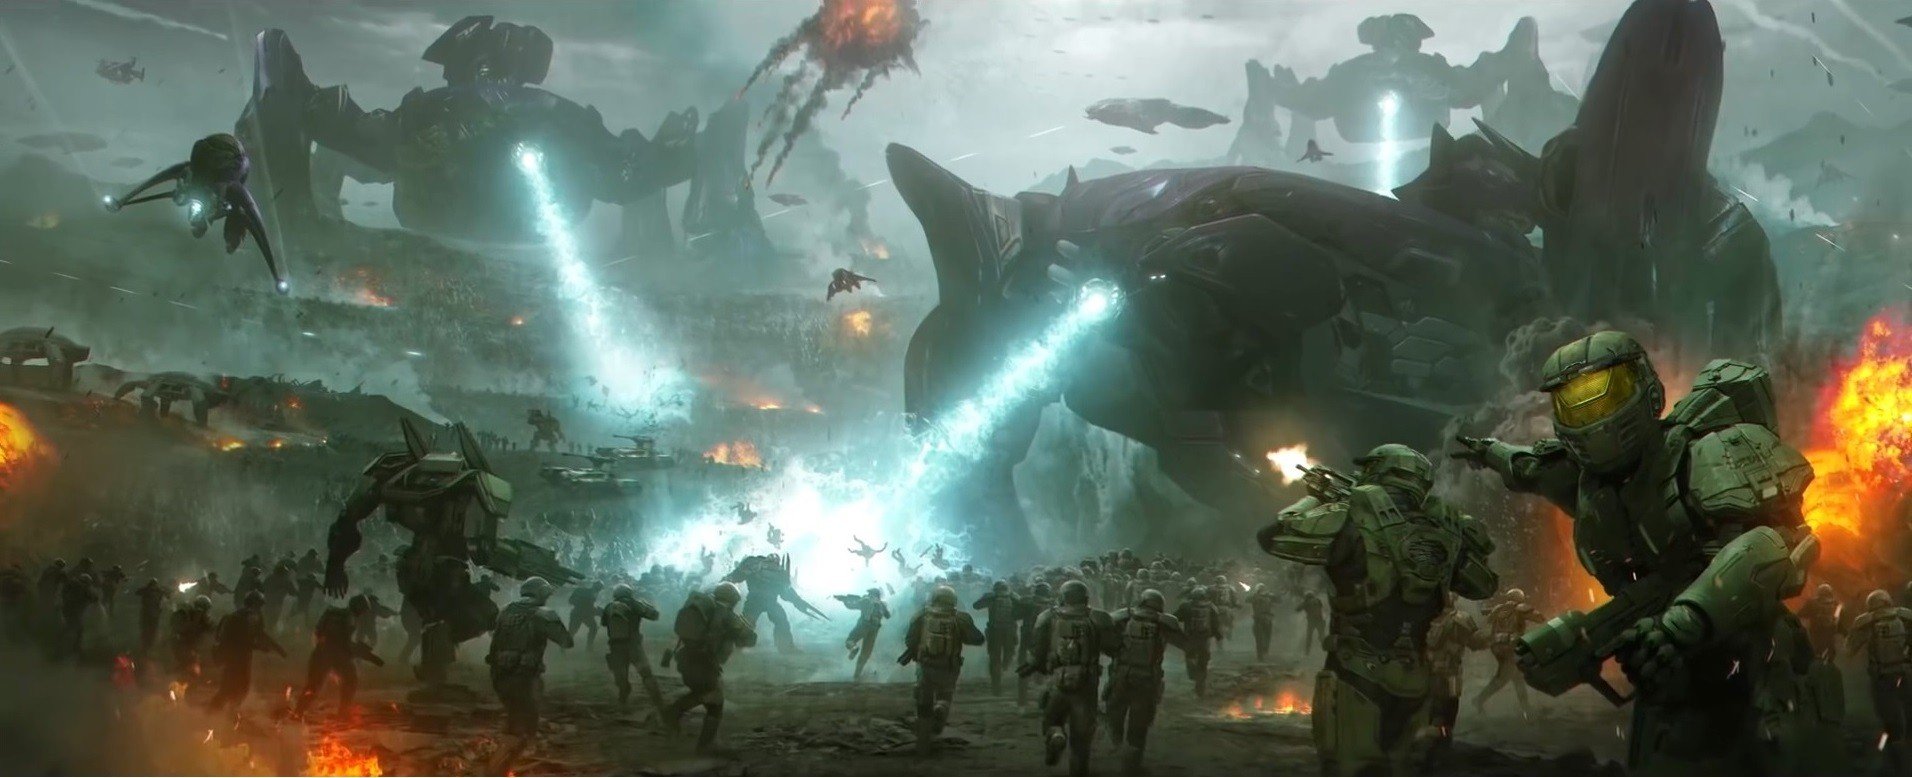 halo wars 2 wallpaper,action adventure game,pc game,strategy video game,screenshot,digital compositing